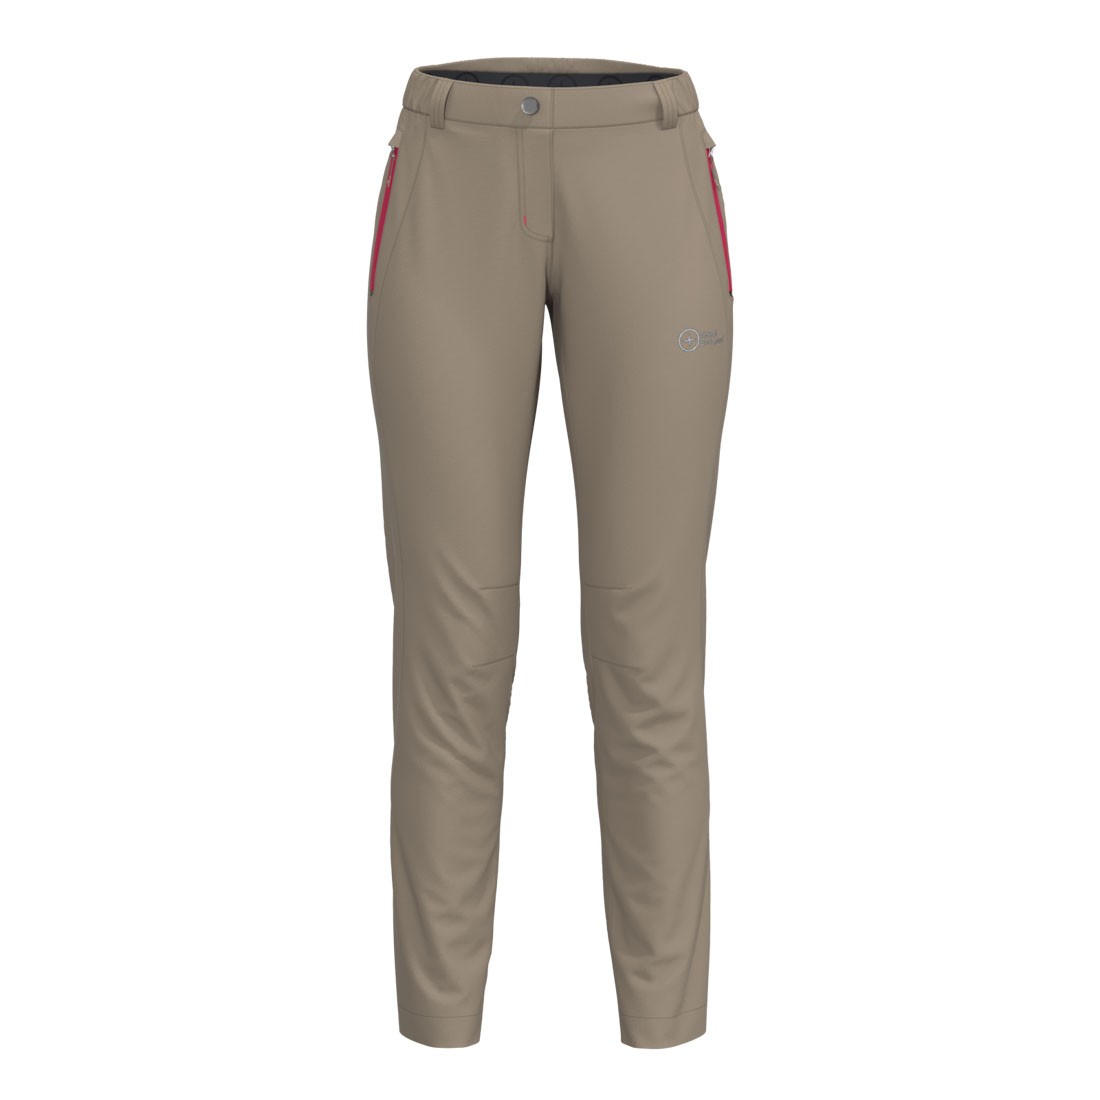 MAGNA VIA - Lady recycled pant